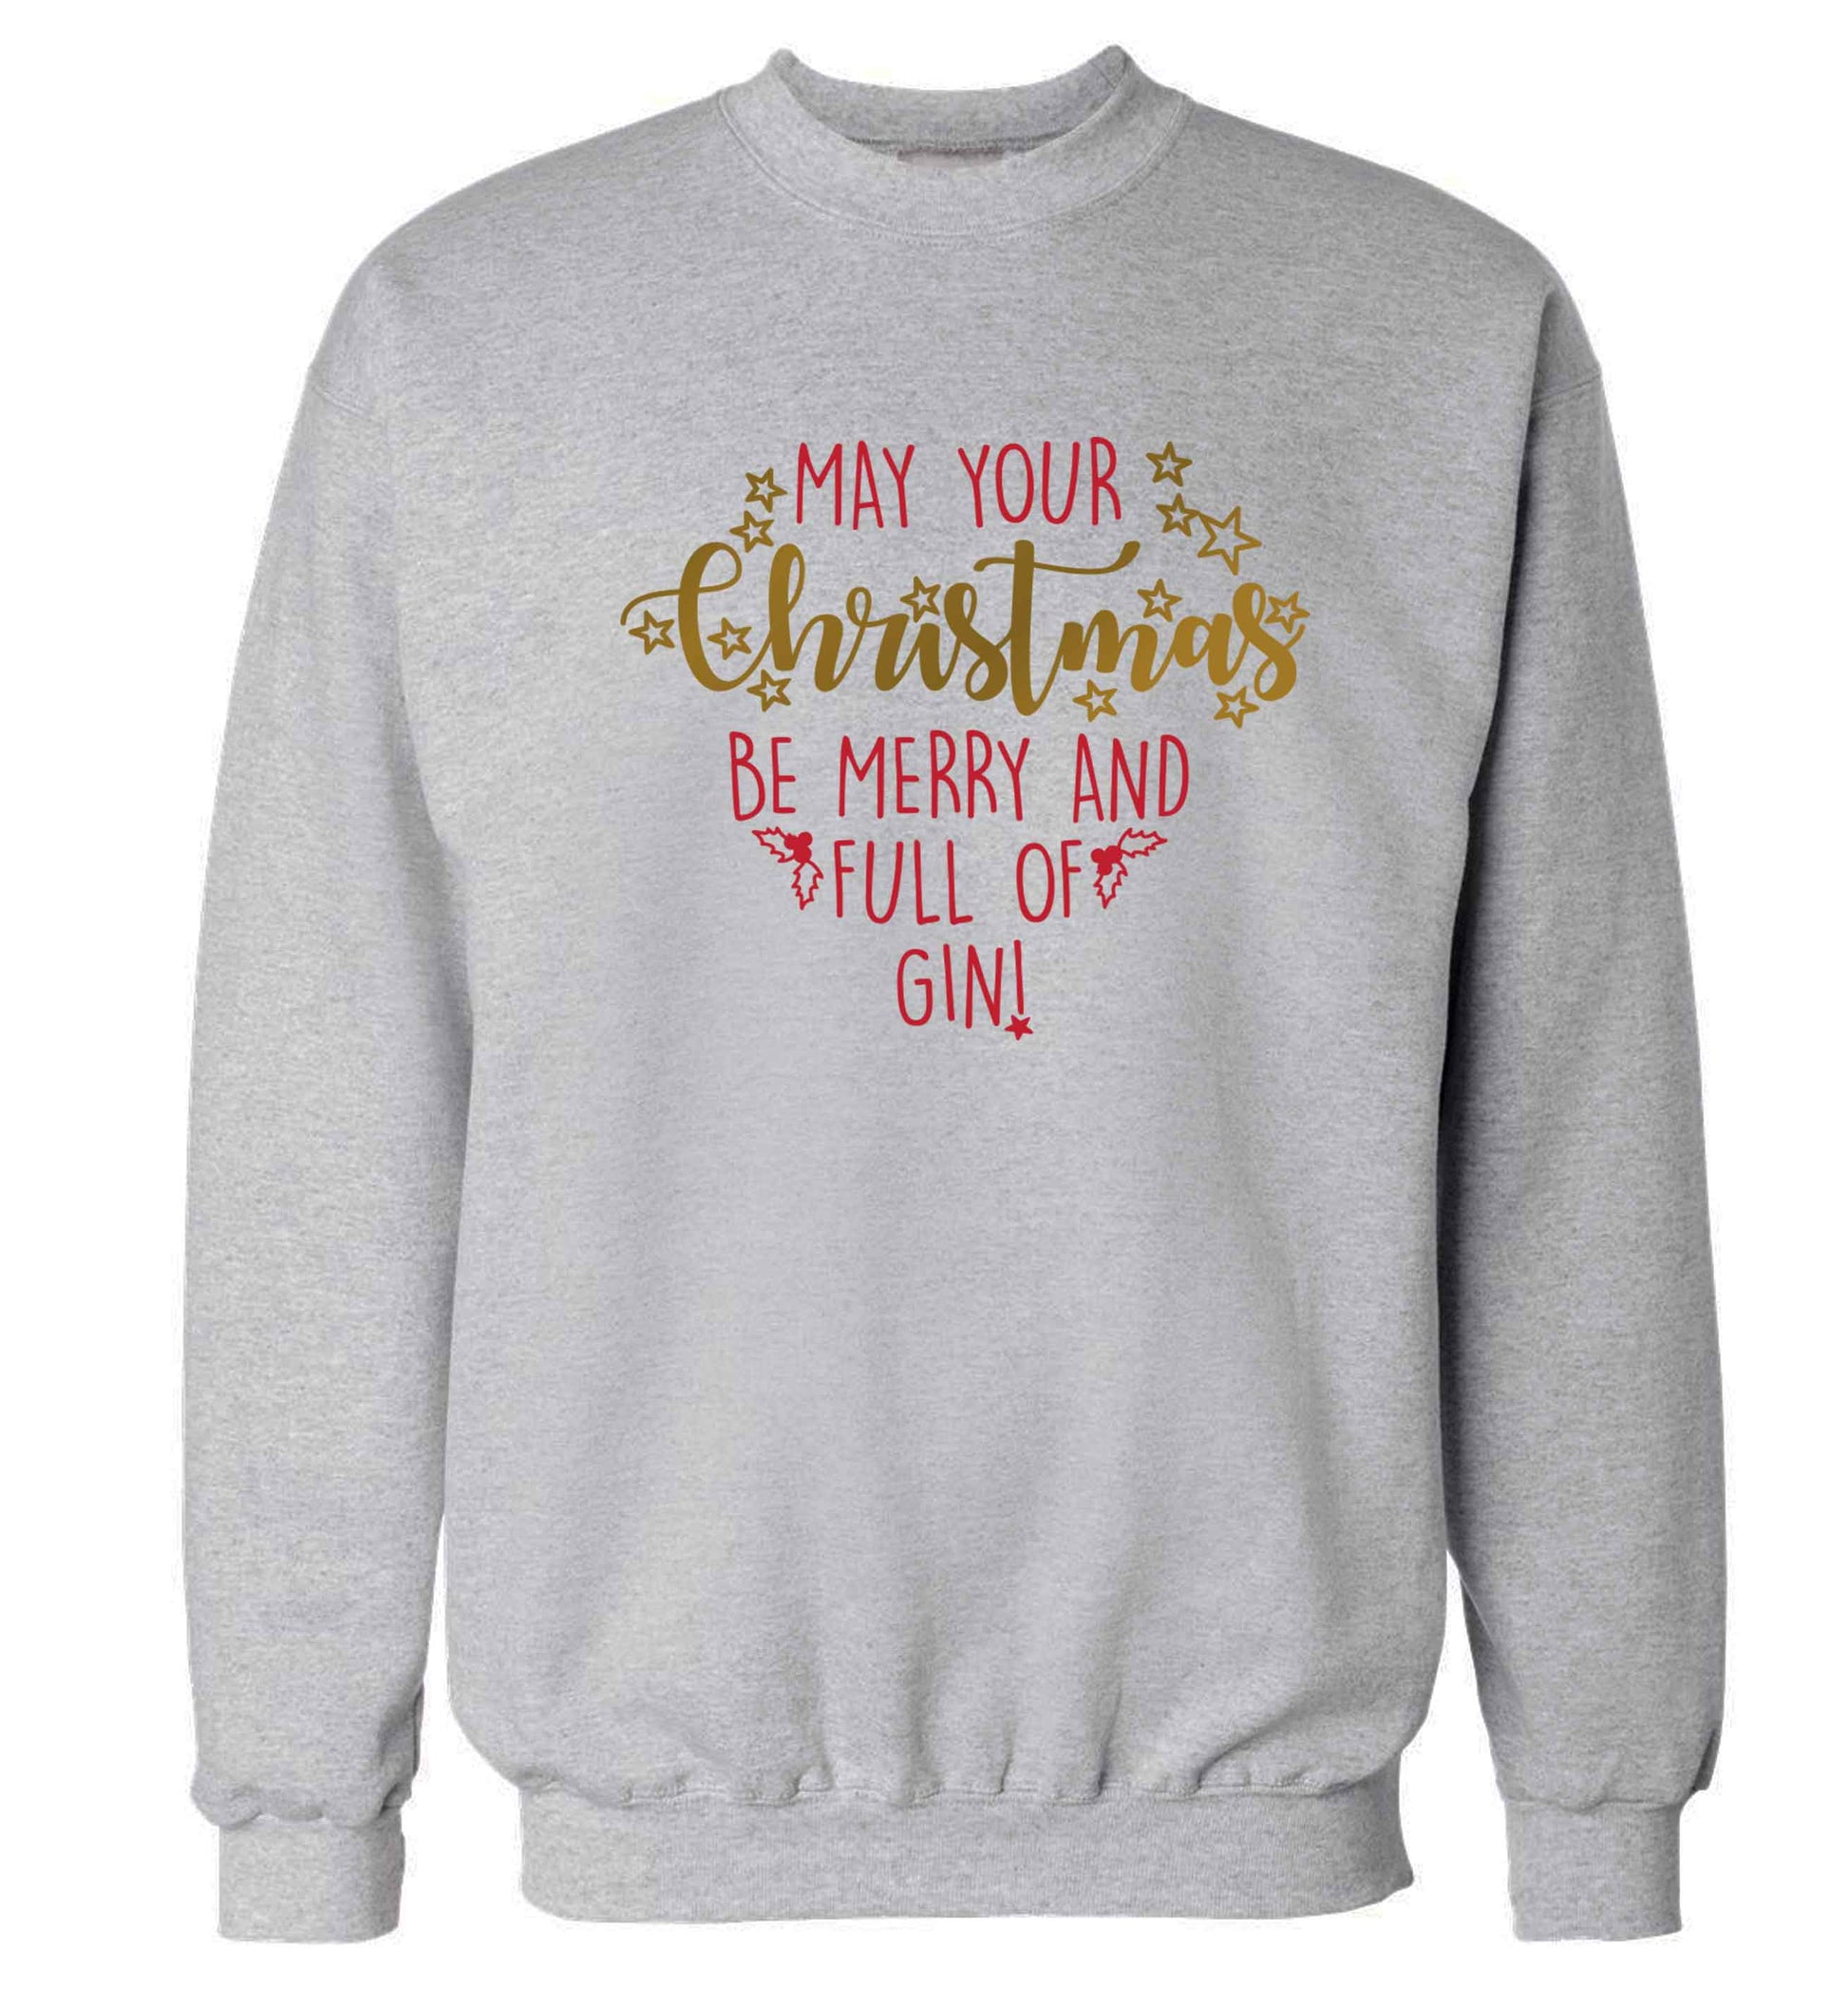 May your Christmas be merry and full of gin Adult's unisex grey Sweater 2XL